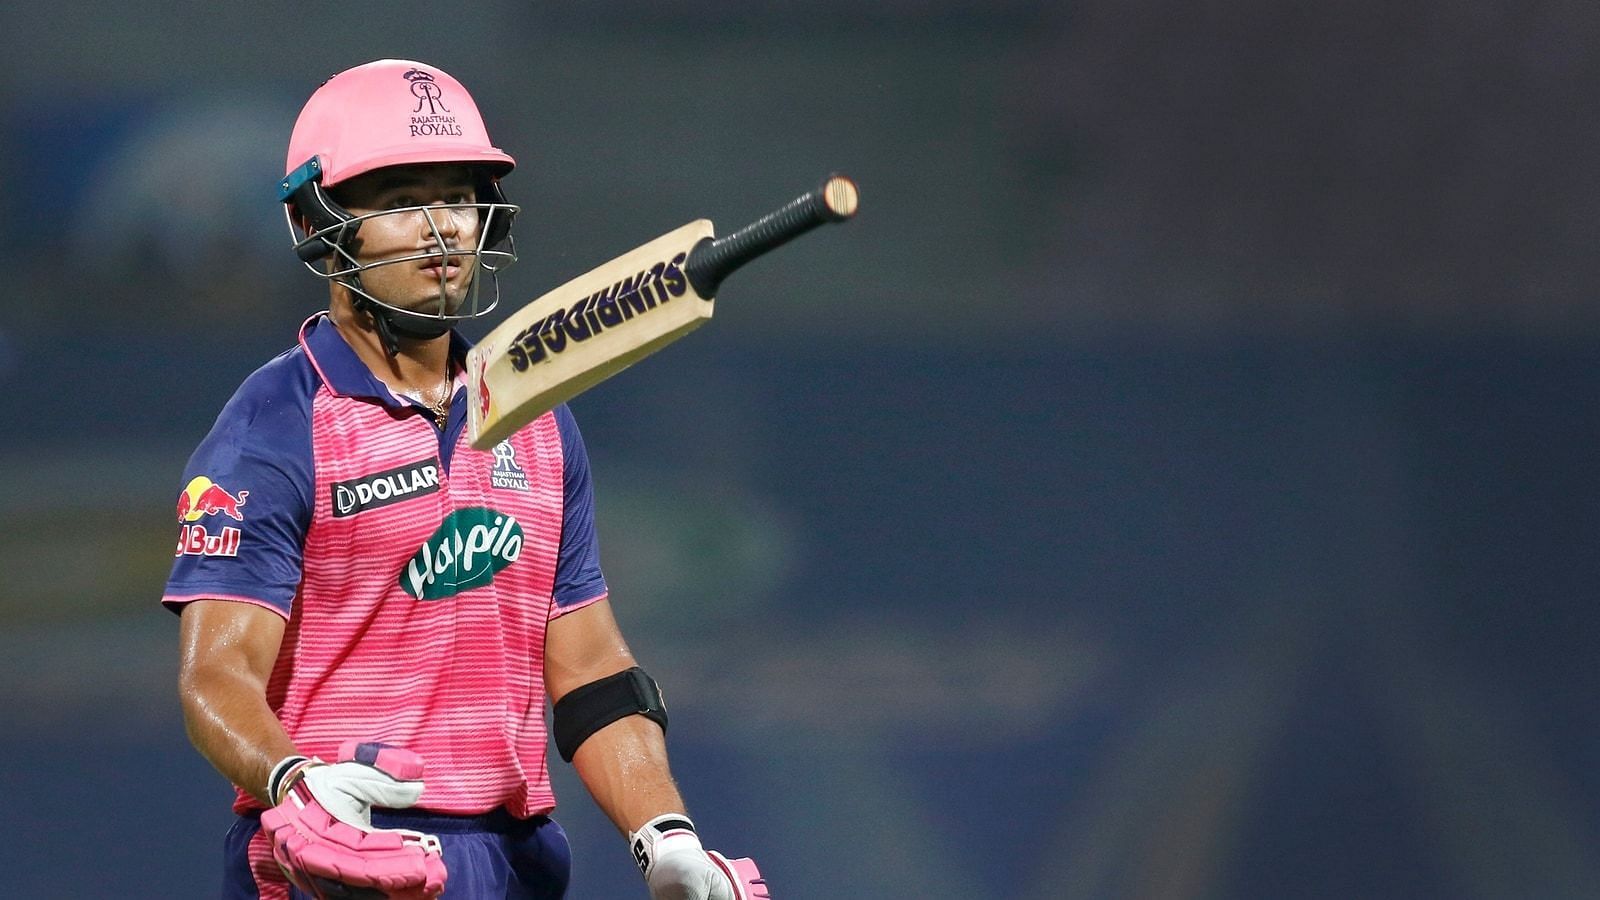 It was another disappointing IPL campaign as far as Riyan Parag is concerned